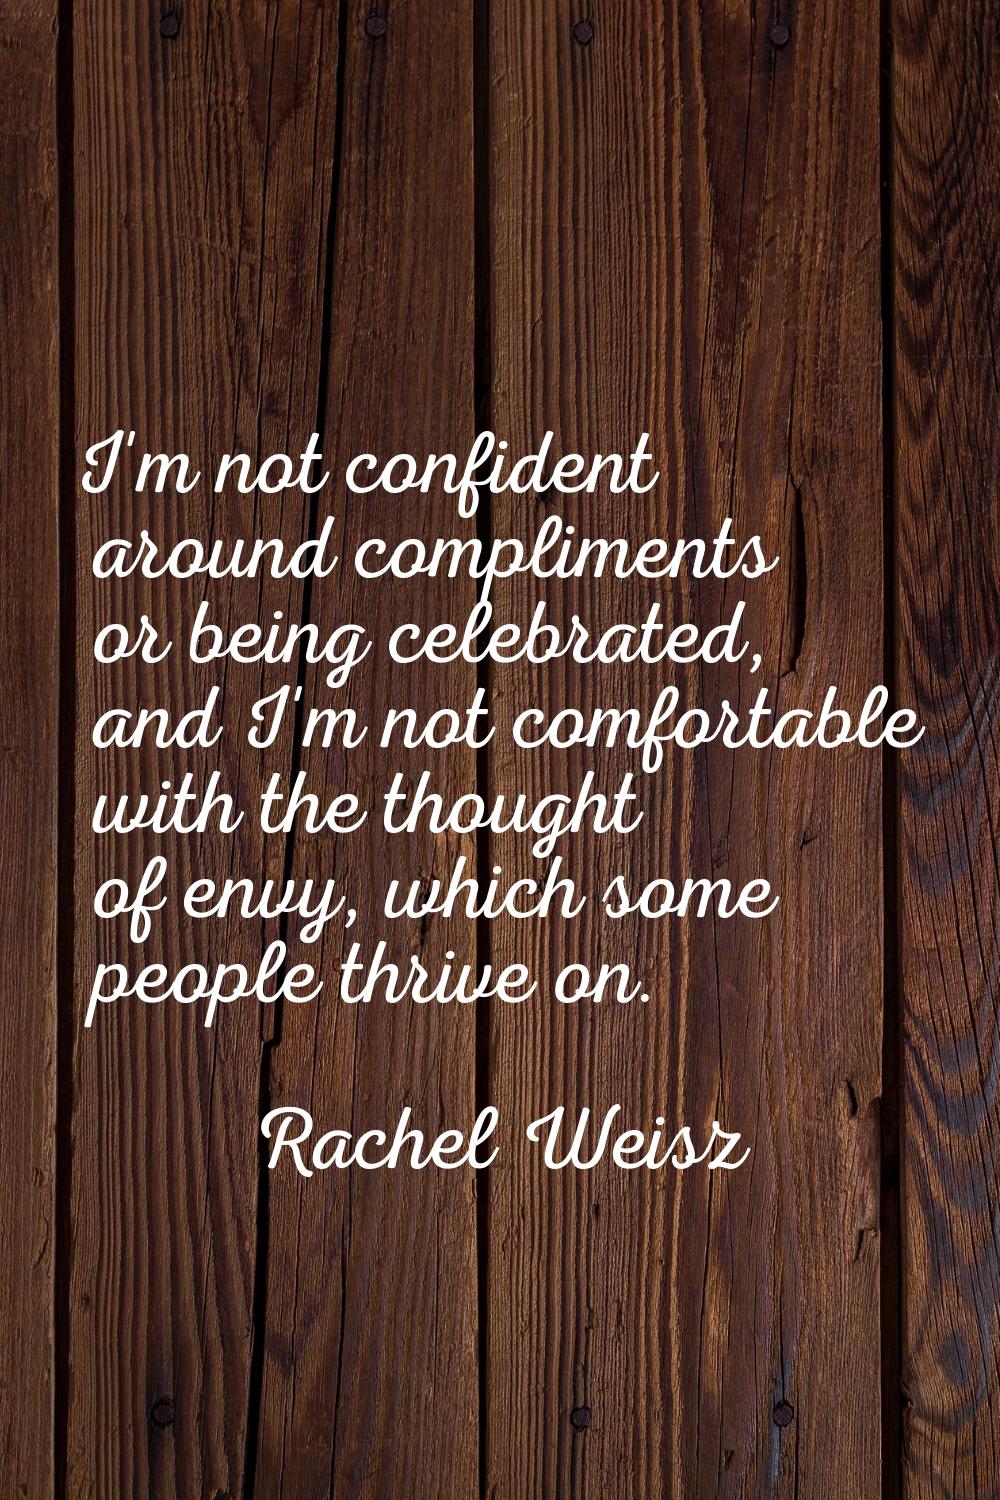 I'm not confident around compliments or being celebrated, and I'm not comfortable with the thought 